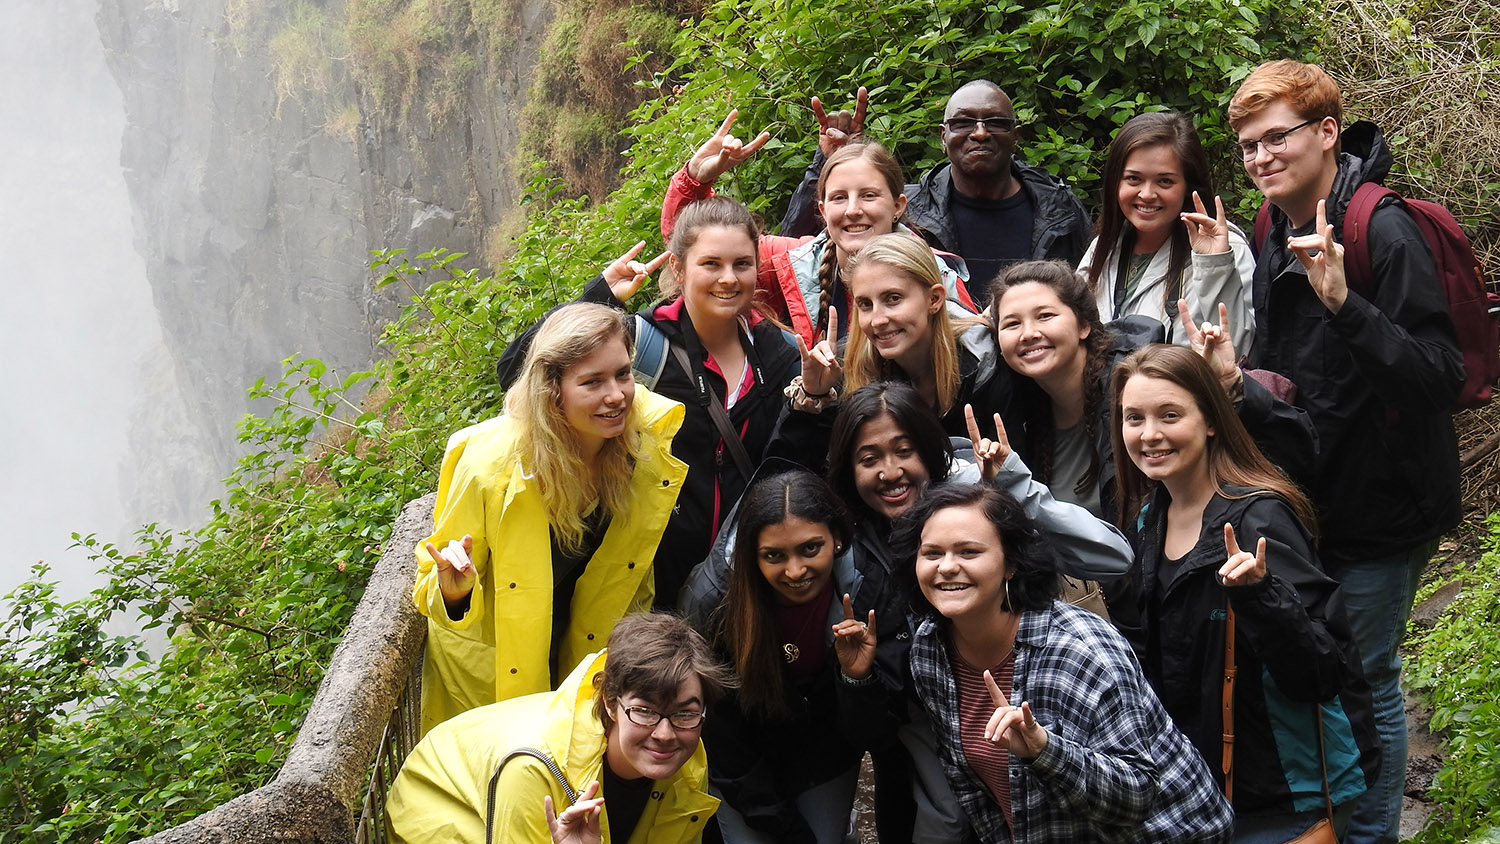 students hold up "wolfie" hand sign while standing near waterfall